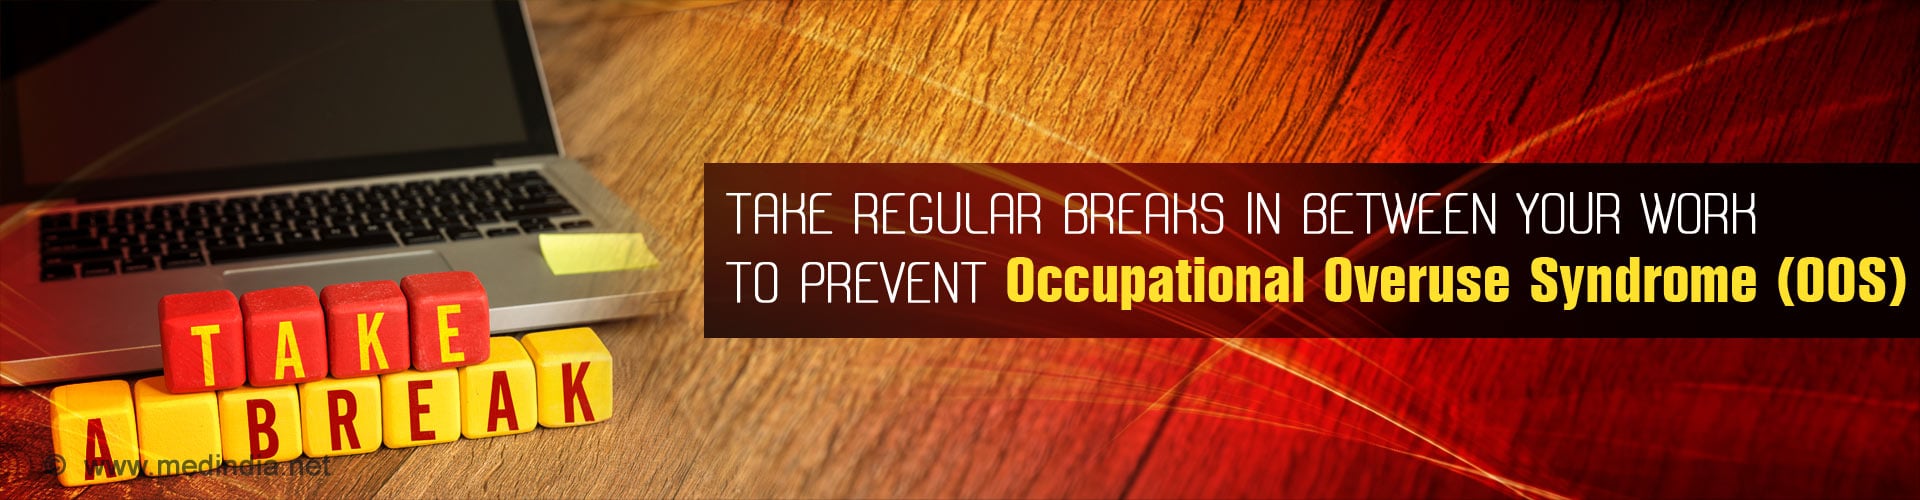 Take regular breaks in between your work to prevent Occupational Overuse Syndrome (OOS)